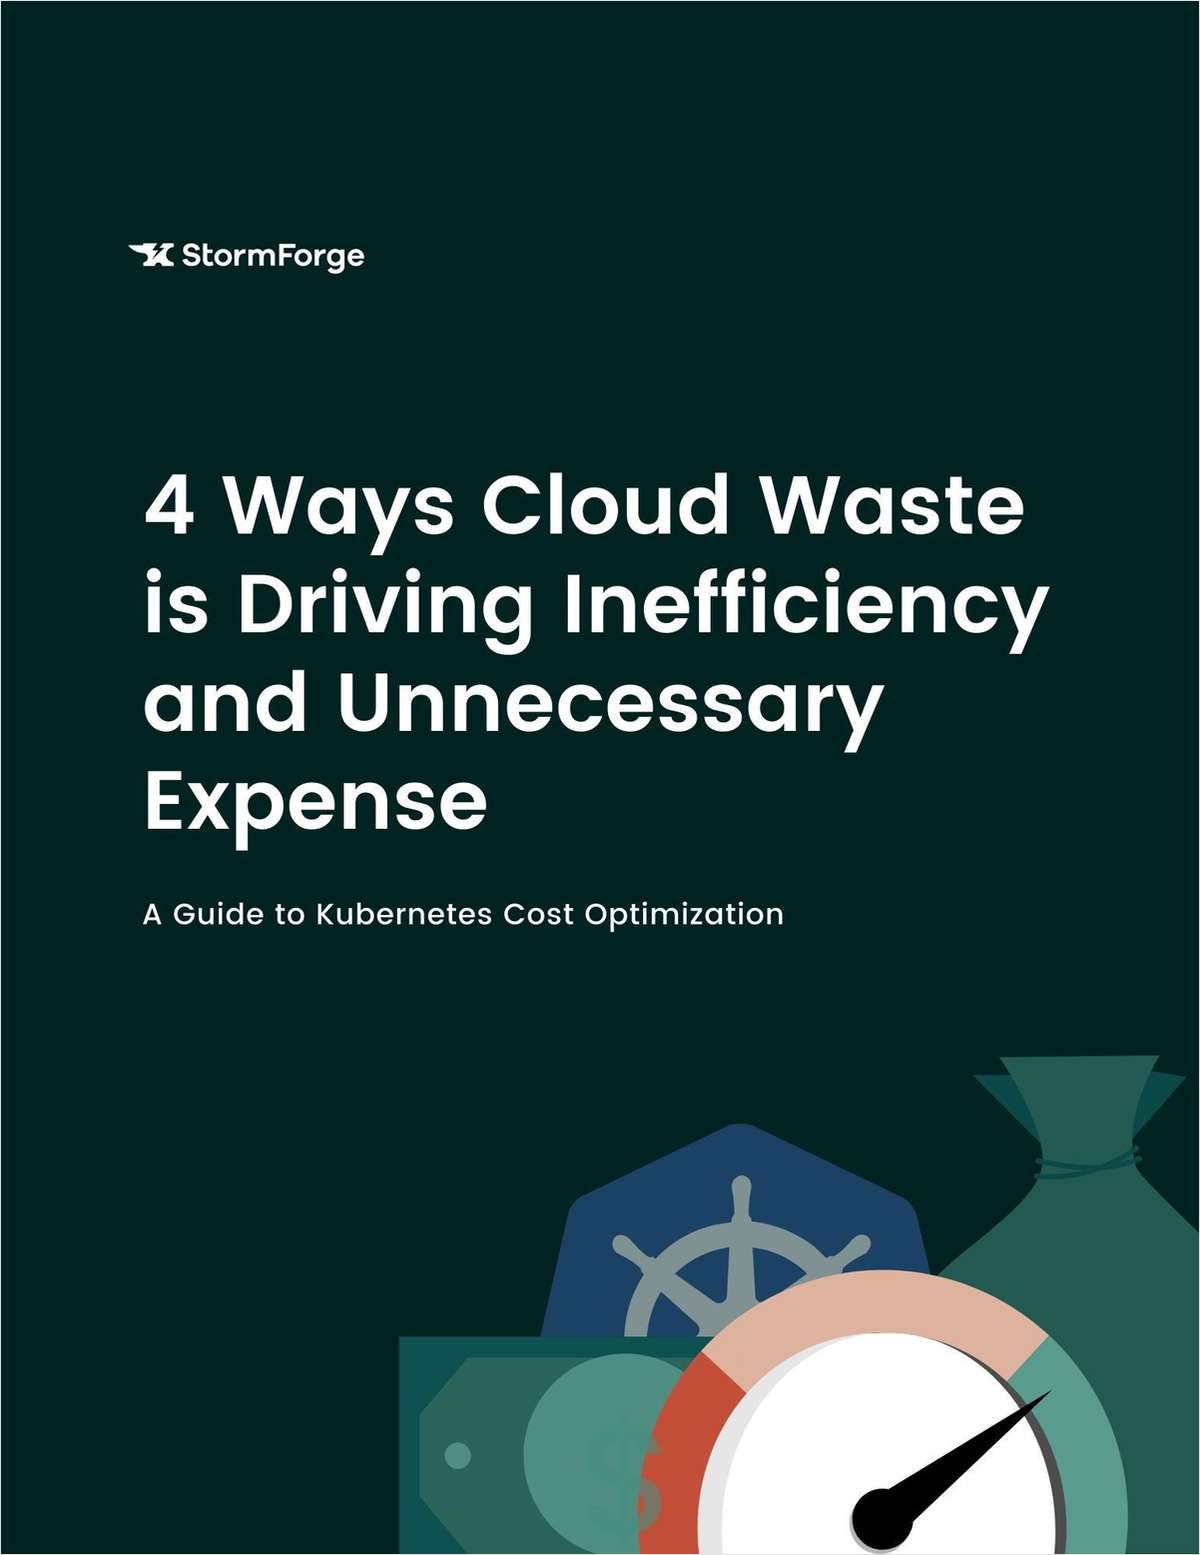 4 Ways Cloud Waste is Driving Inefficiency and Unnecessary Expense